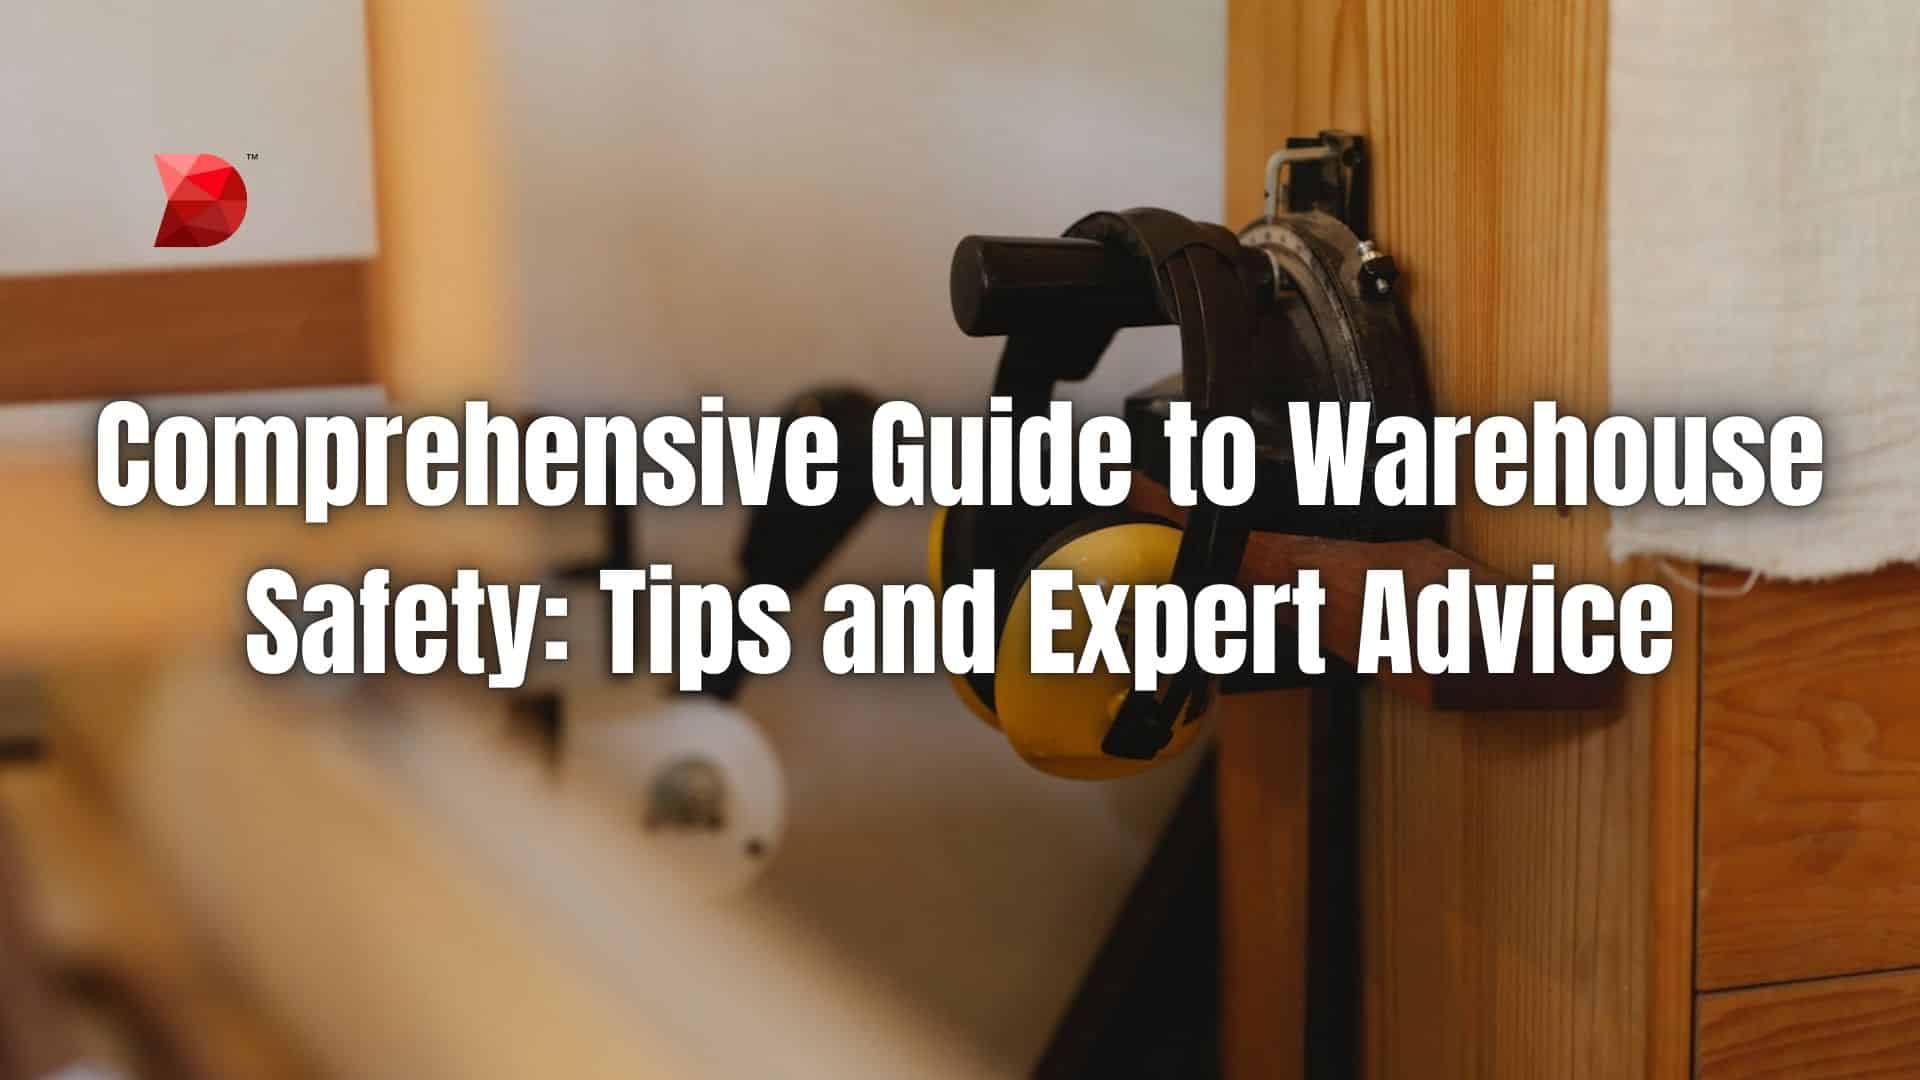 Comprehensive Guide to Warehouse Safety Tips and Expert Advice